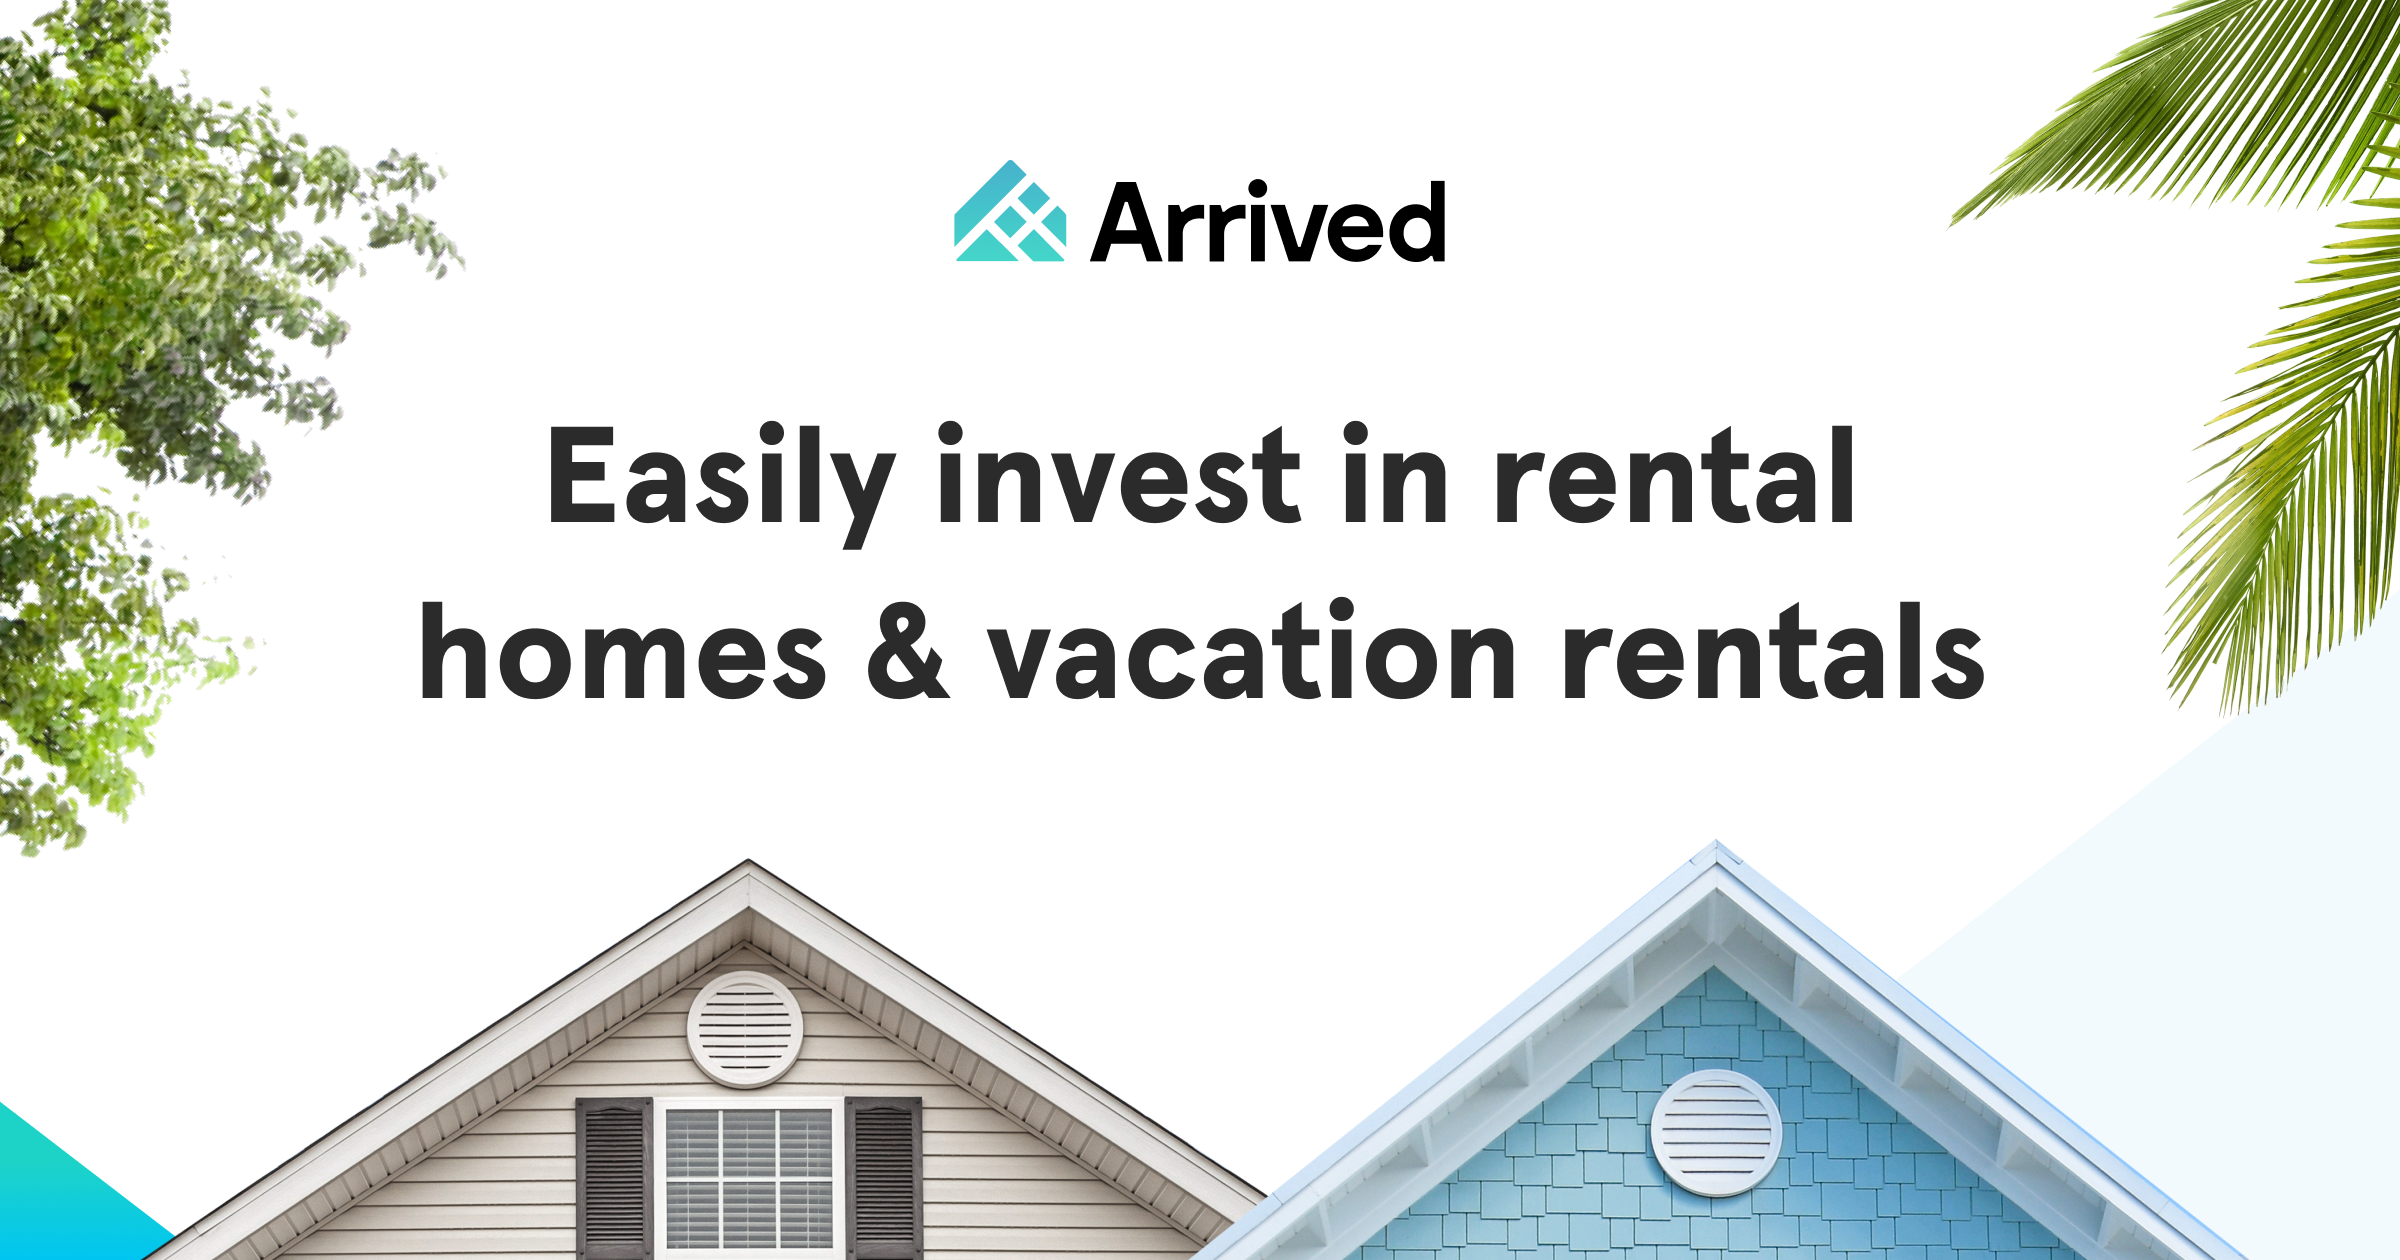 Thumbnail of Arrived Homes | Easily invest in rental properties | Real Estate Investing Platform